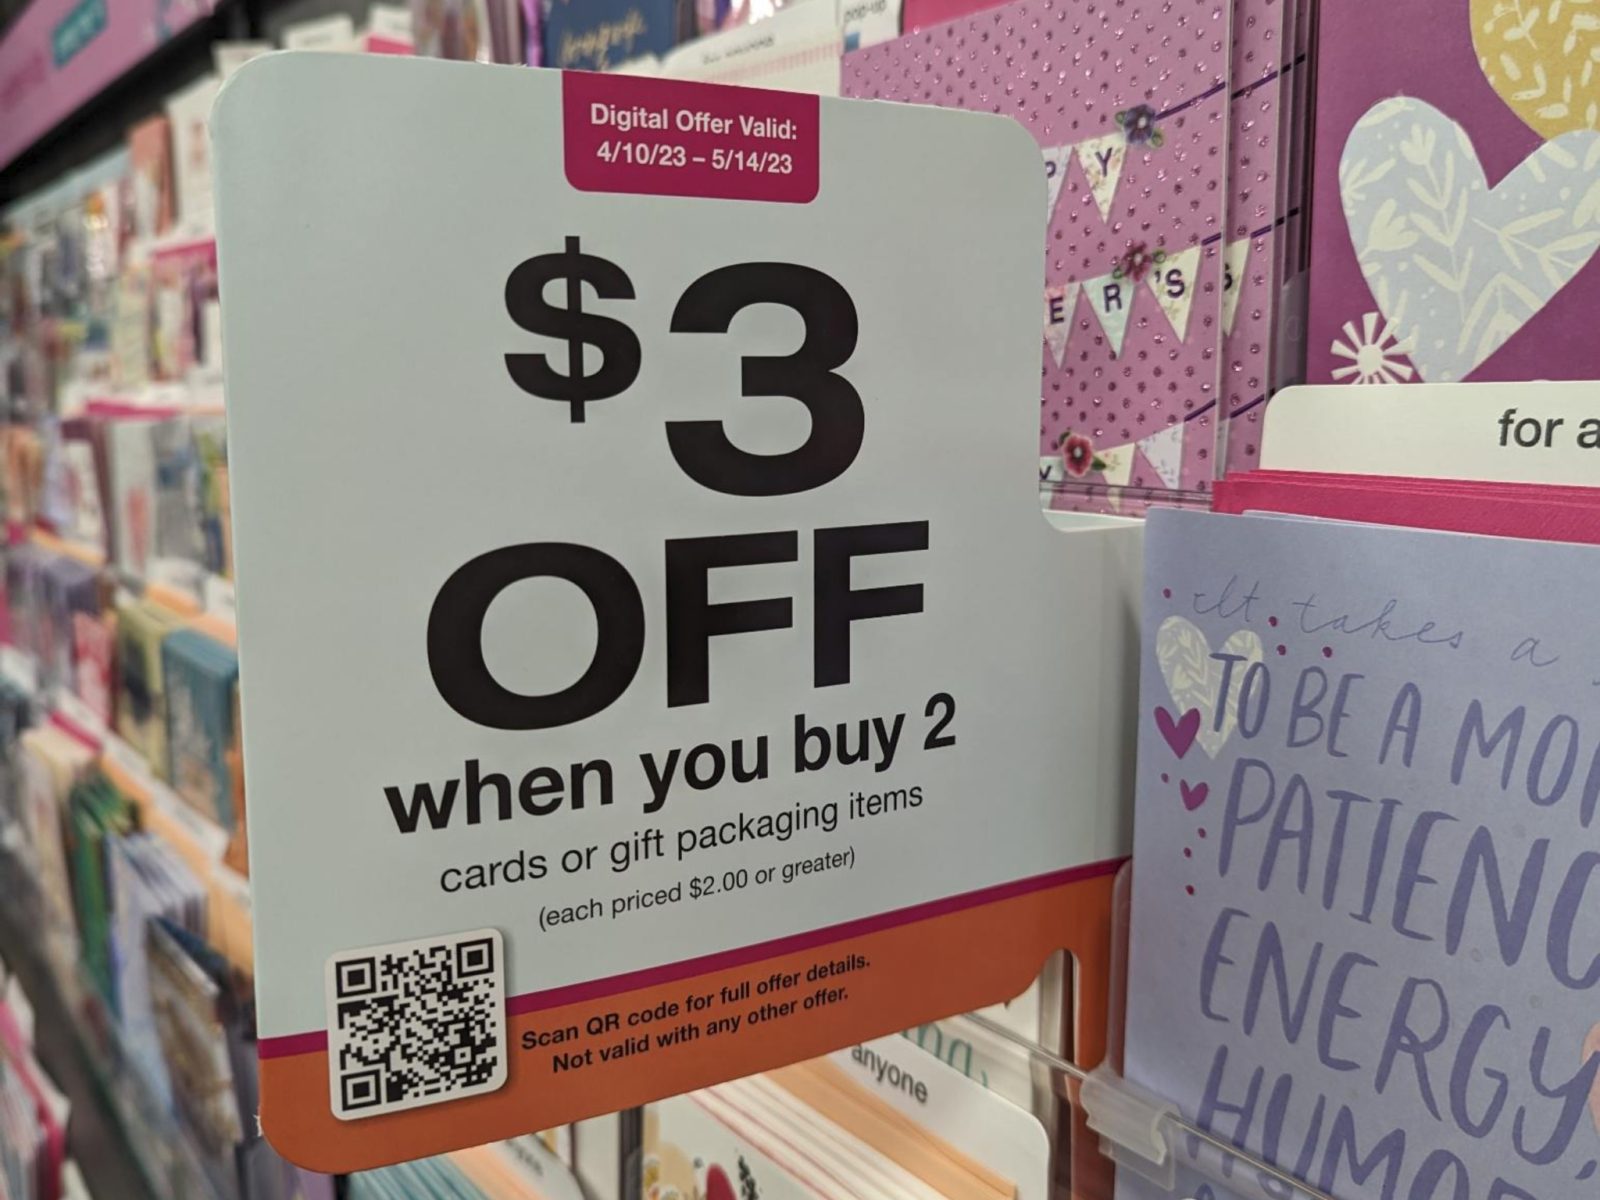 American Greetings Coupon + Ibotta Cash Back Offer – Grab Cheap Cards, Gift Wrap, & More